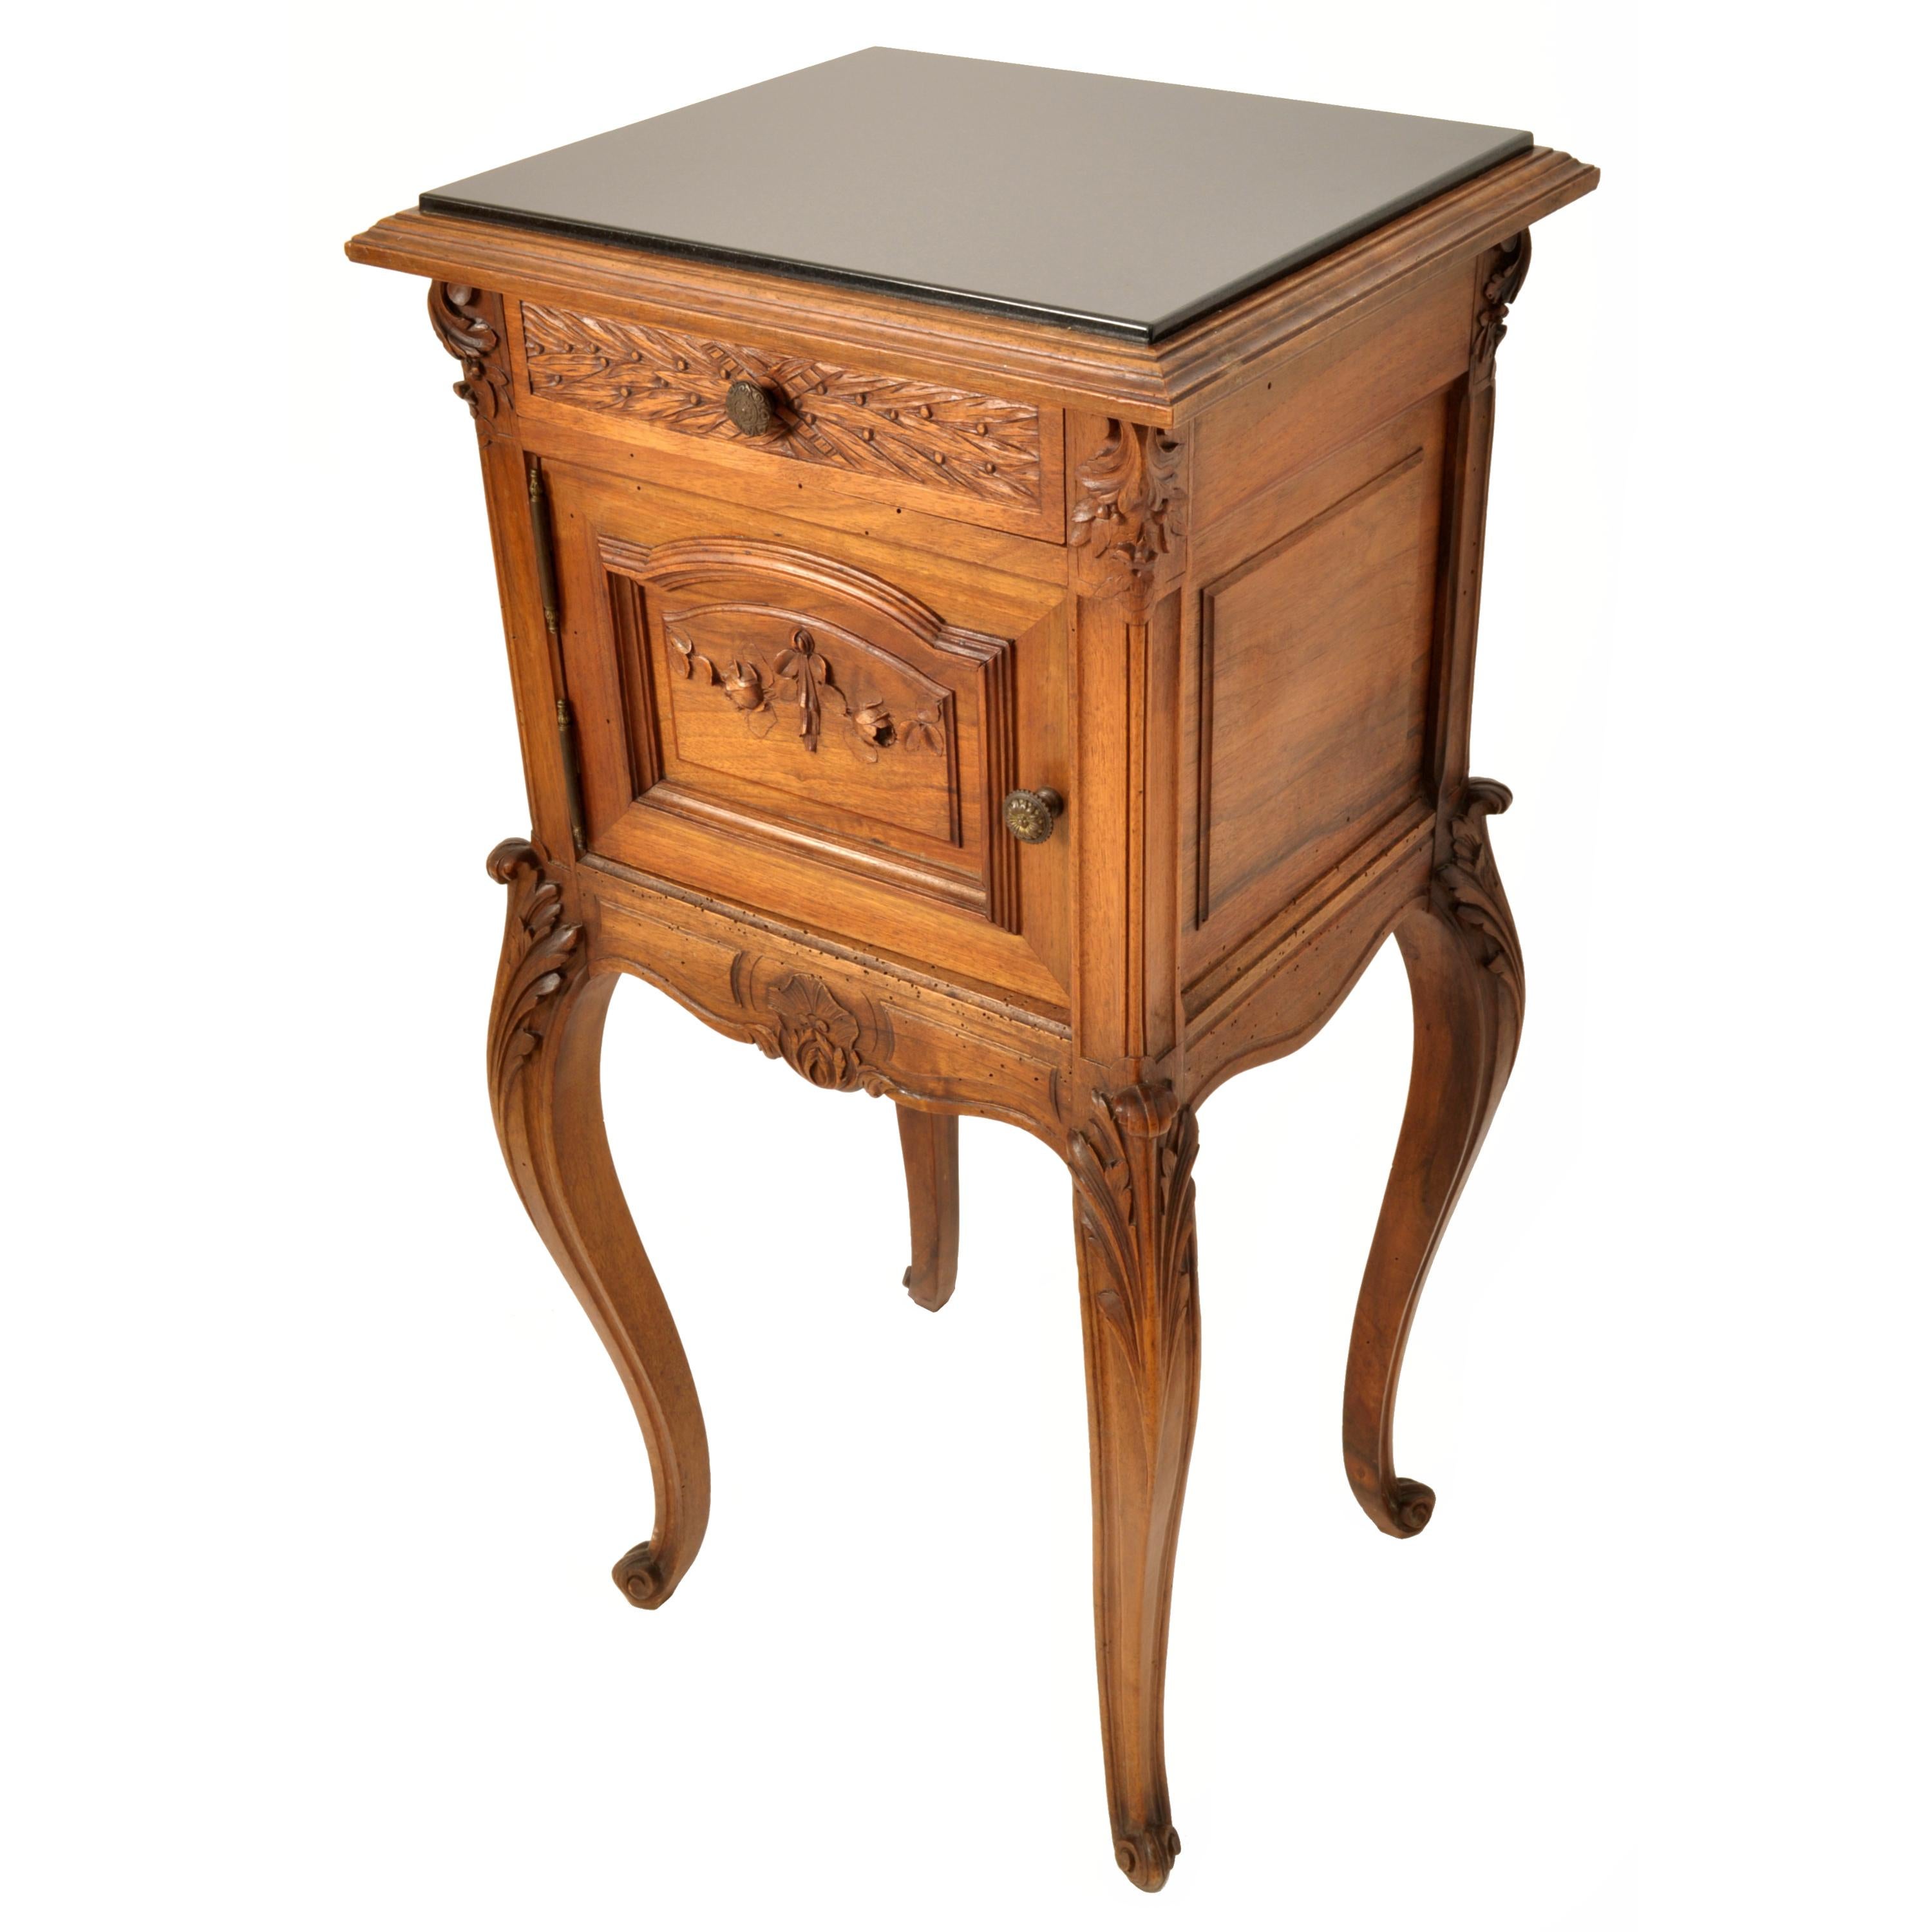 Antique French Provincial Louis XVI Carved Walnut & Marble Nightstand Table 1880 For Sale 4